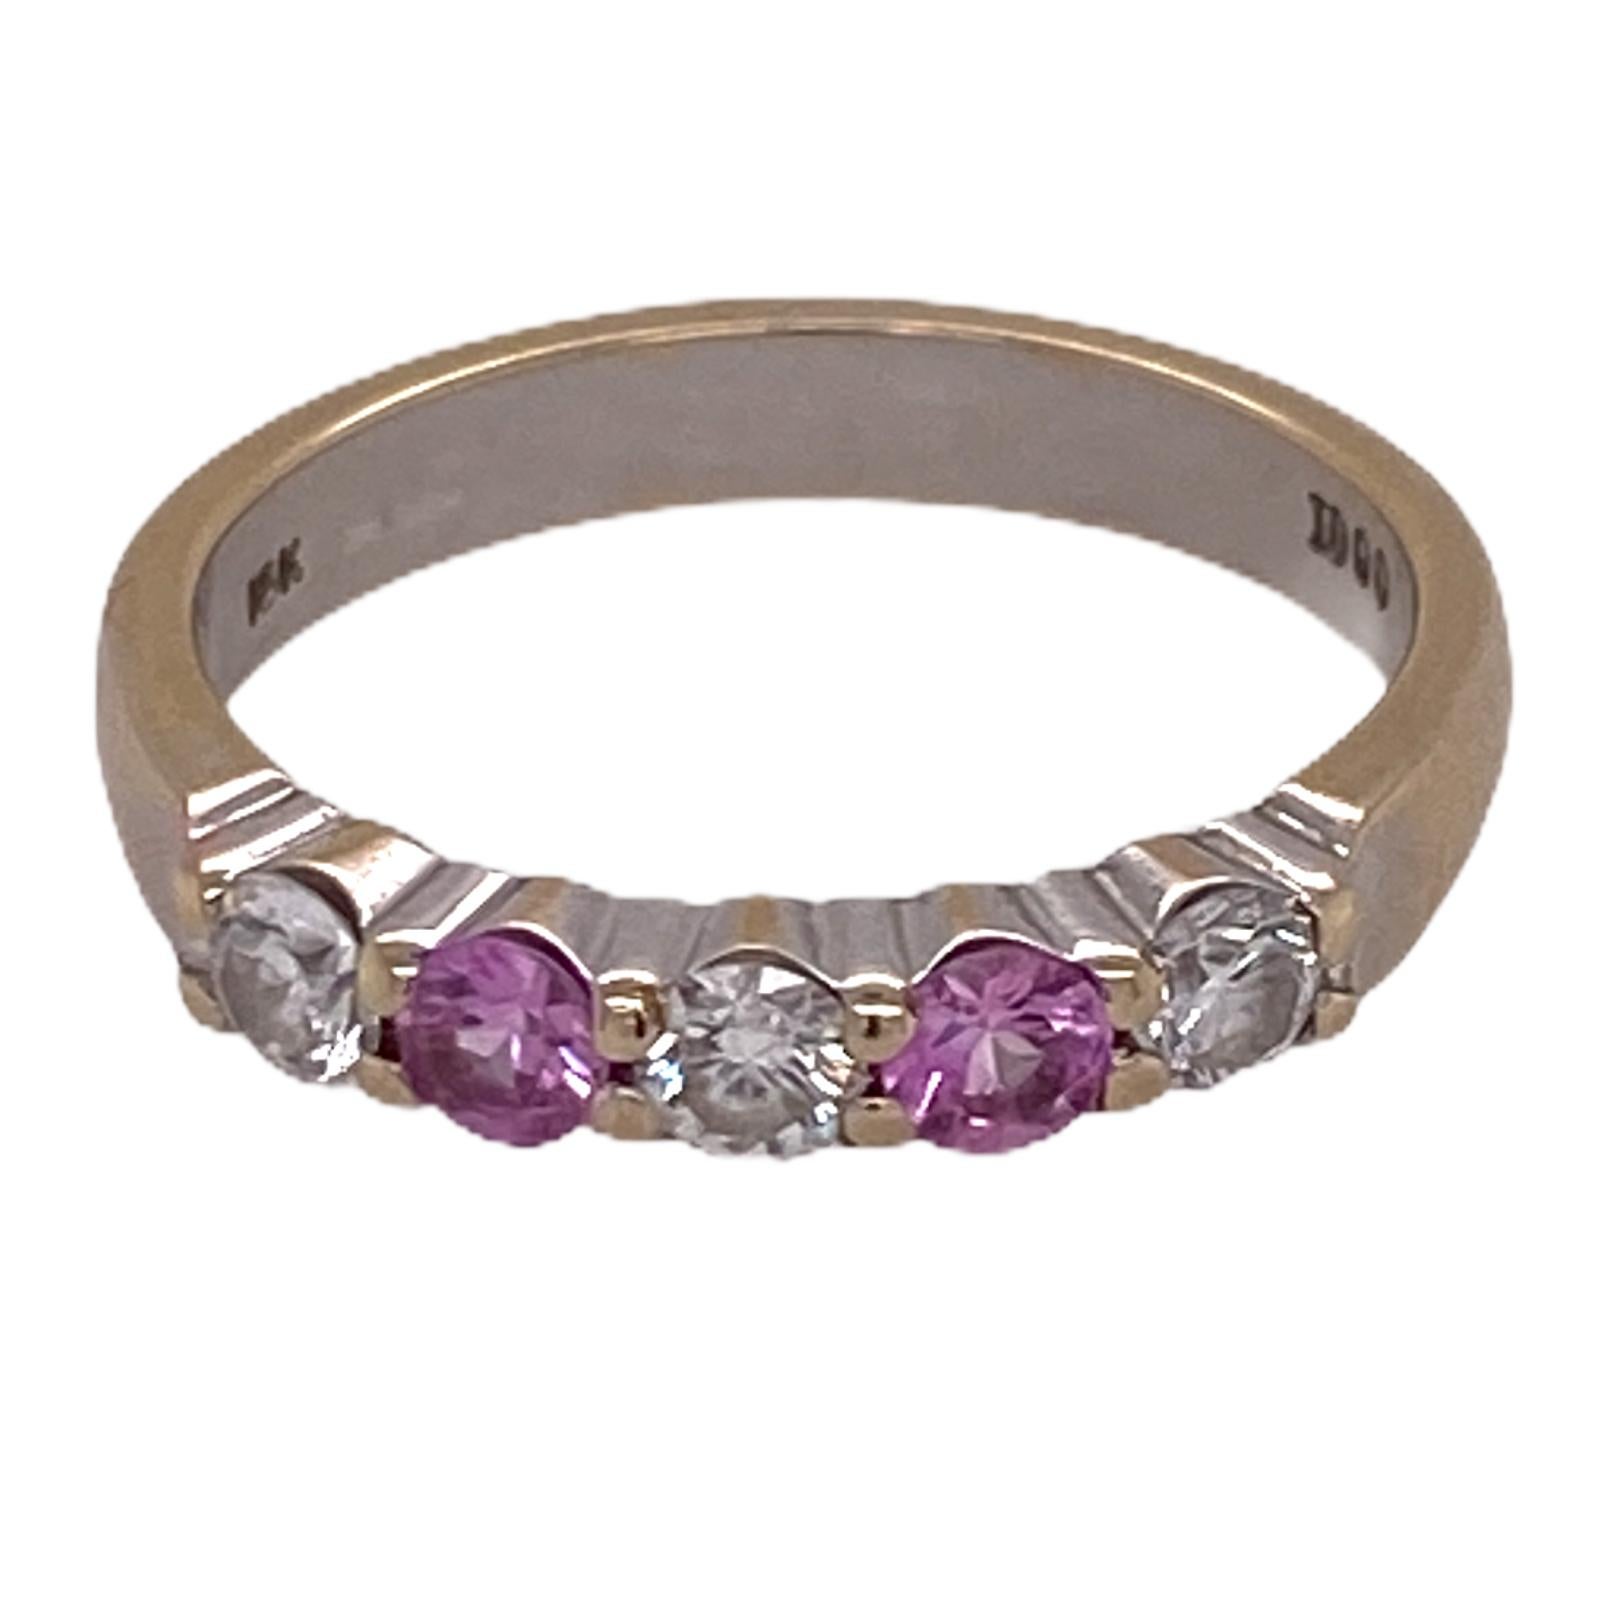 Beautiful diamond and pink sapphire wedding band fashioned in 18 karat white and yellow gold. The band features 3 round brilliant cut diamonds weighing approximately .30 carat total weight and graded H-I color and SI1 clarity. The two pink sapphires